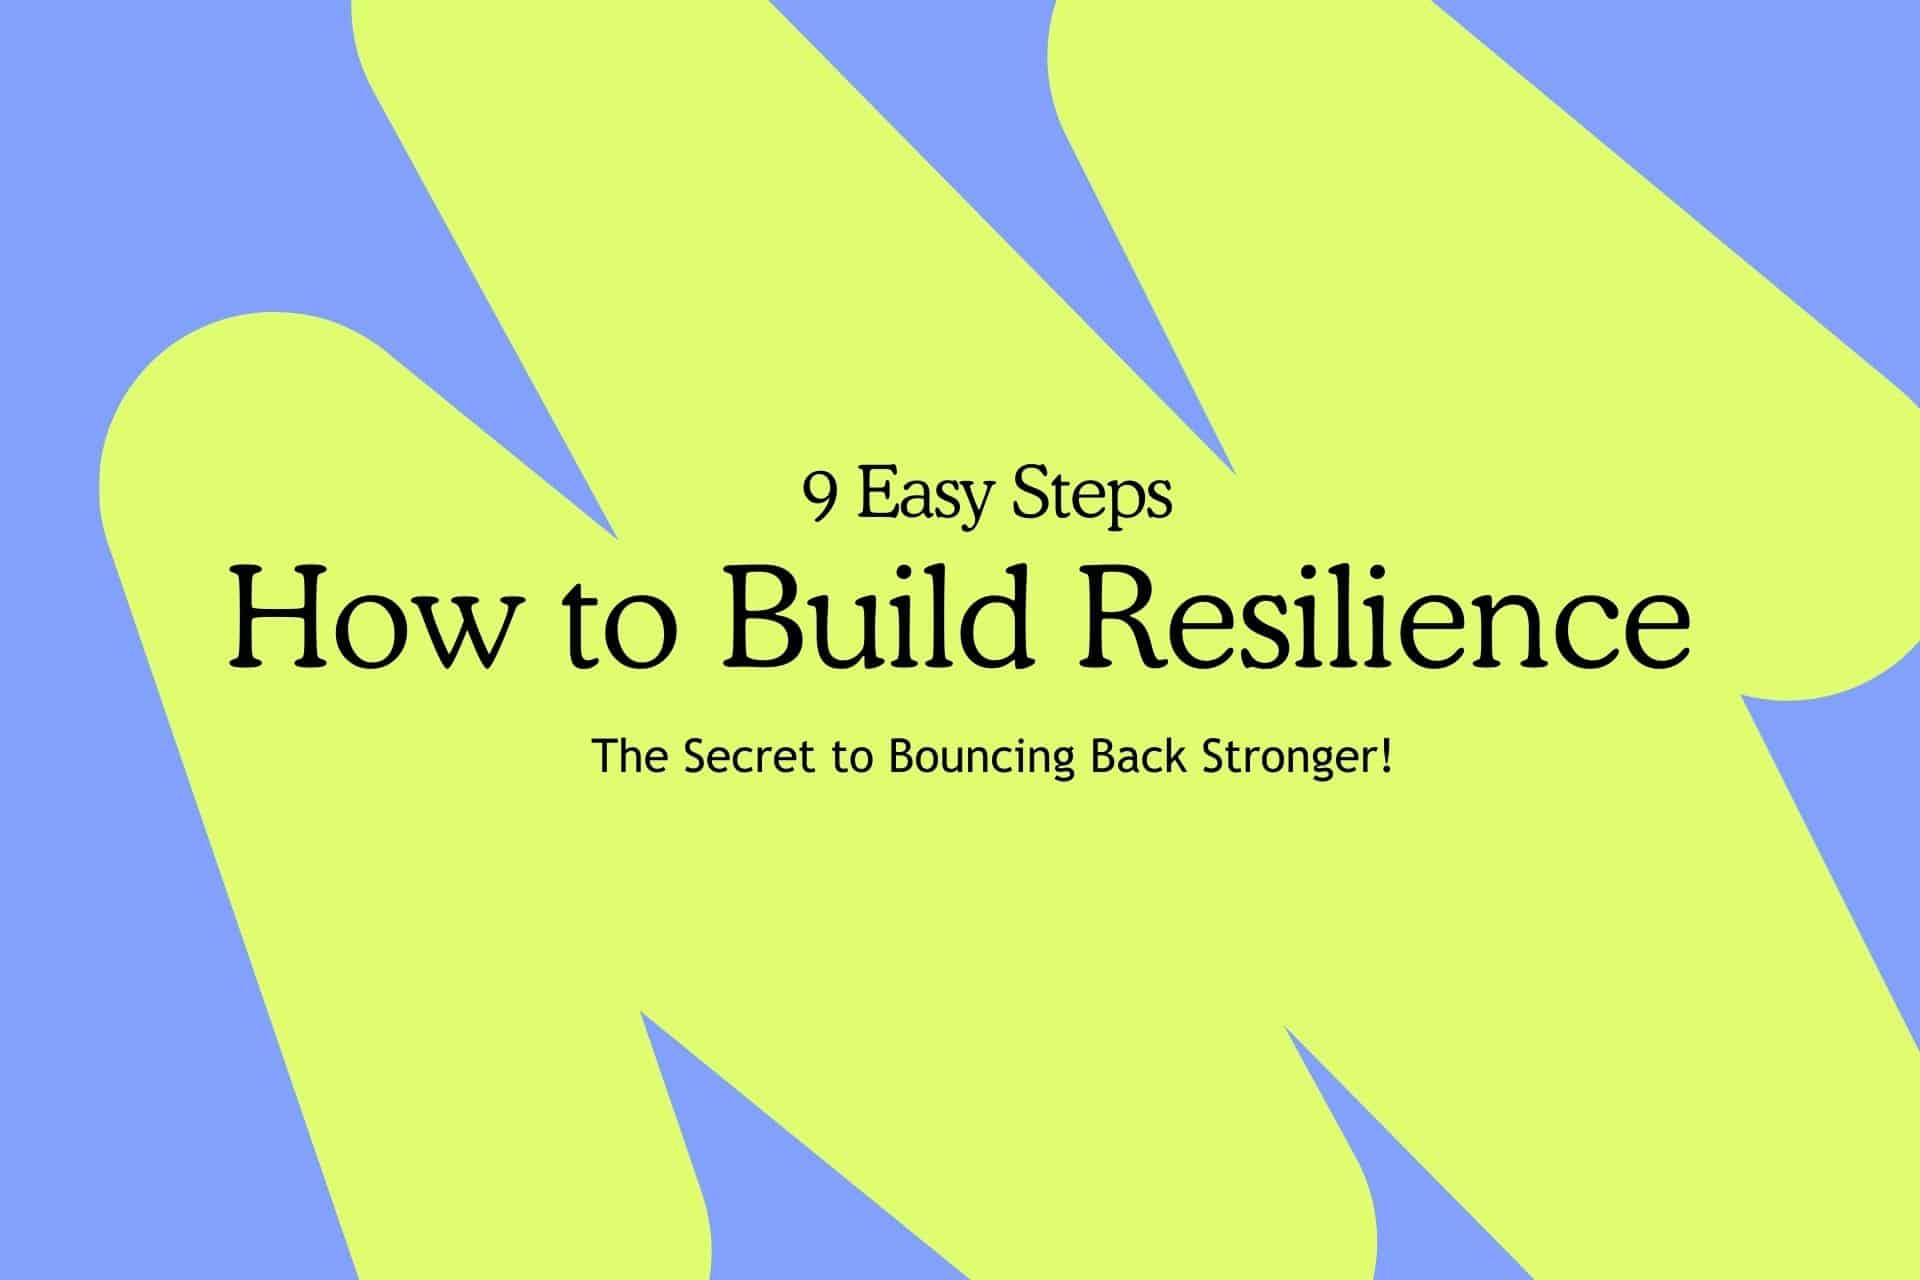 how to build resilience